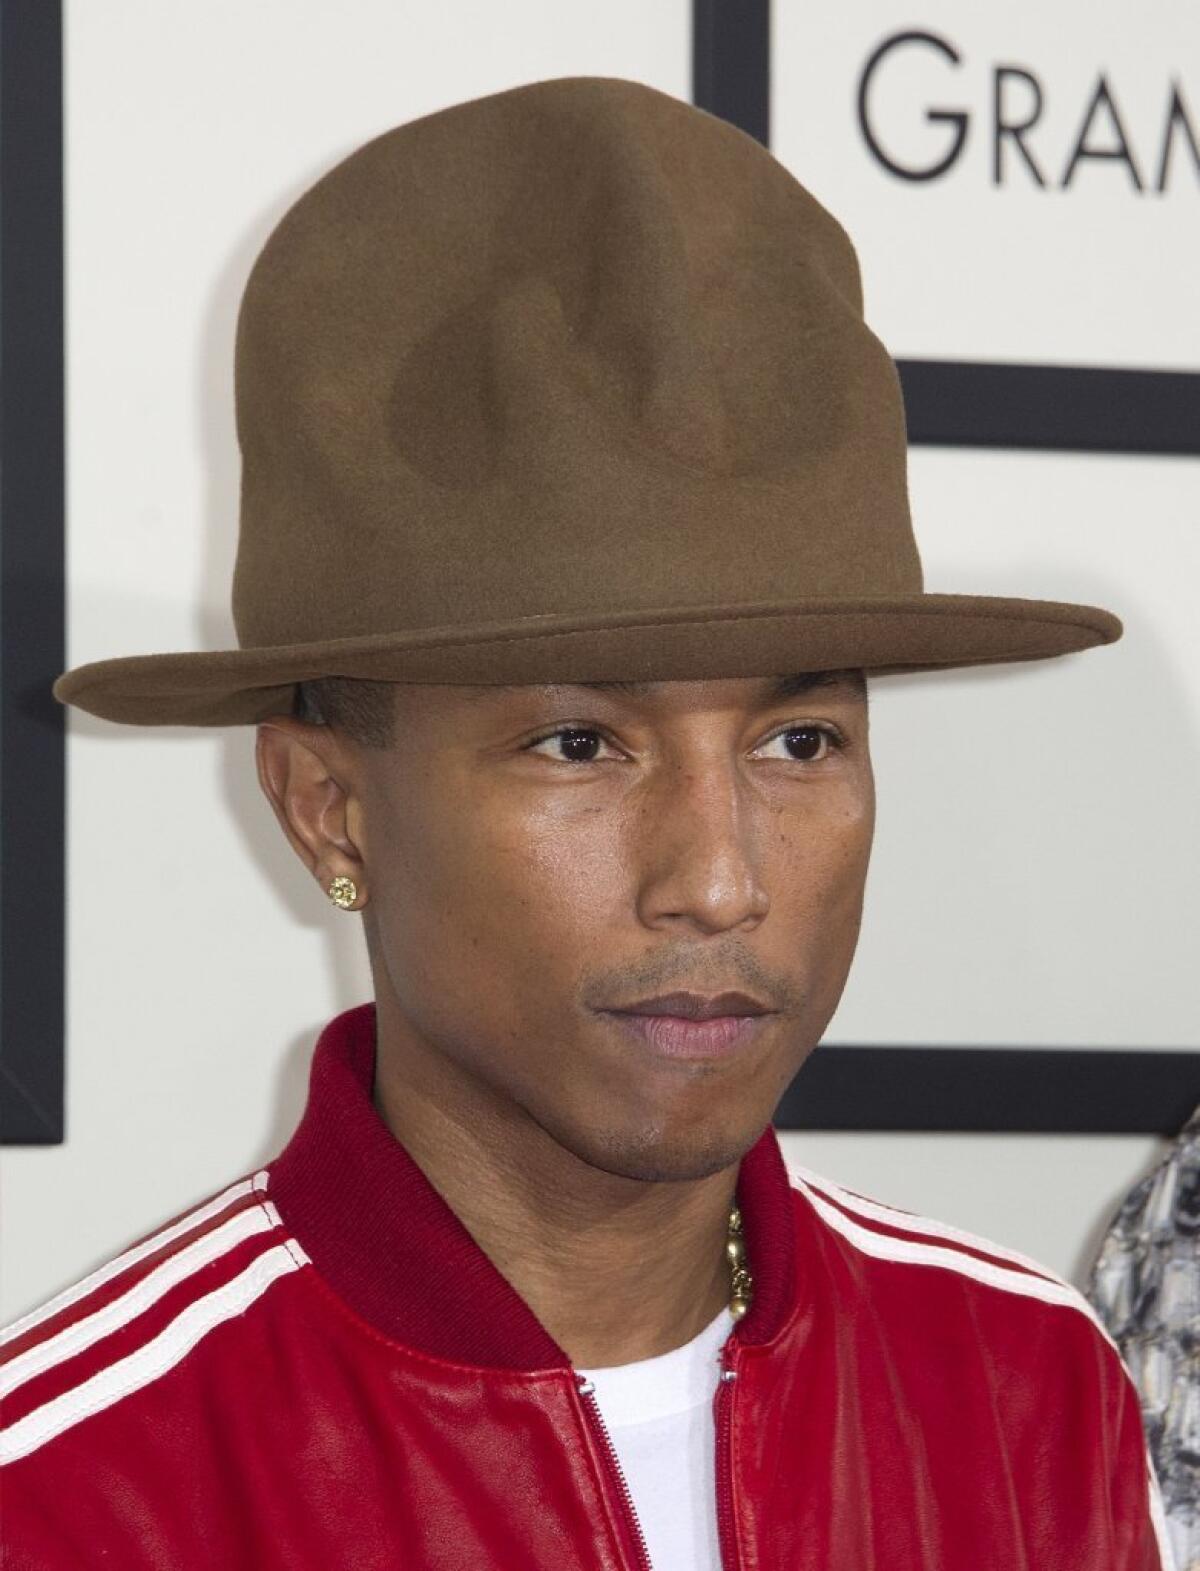 Recording artist Pharrell Williams sports a Vivienne Westwood "Mountain" hat on the Grammy Awards red carpet. The high-profile headgear went viral, earning comparisons to Smokey Bear and the Arby's logo and spawning a parody Twitter account from the hat's point of view.